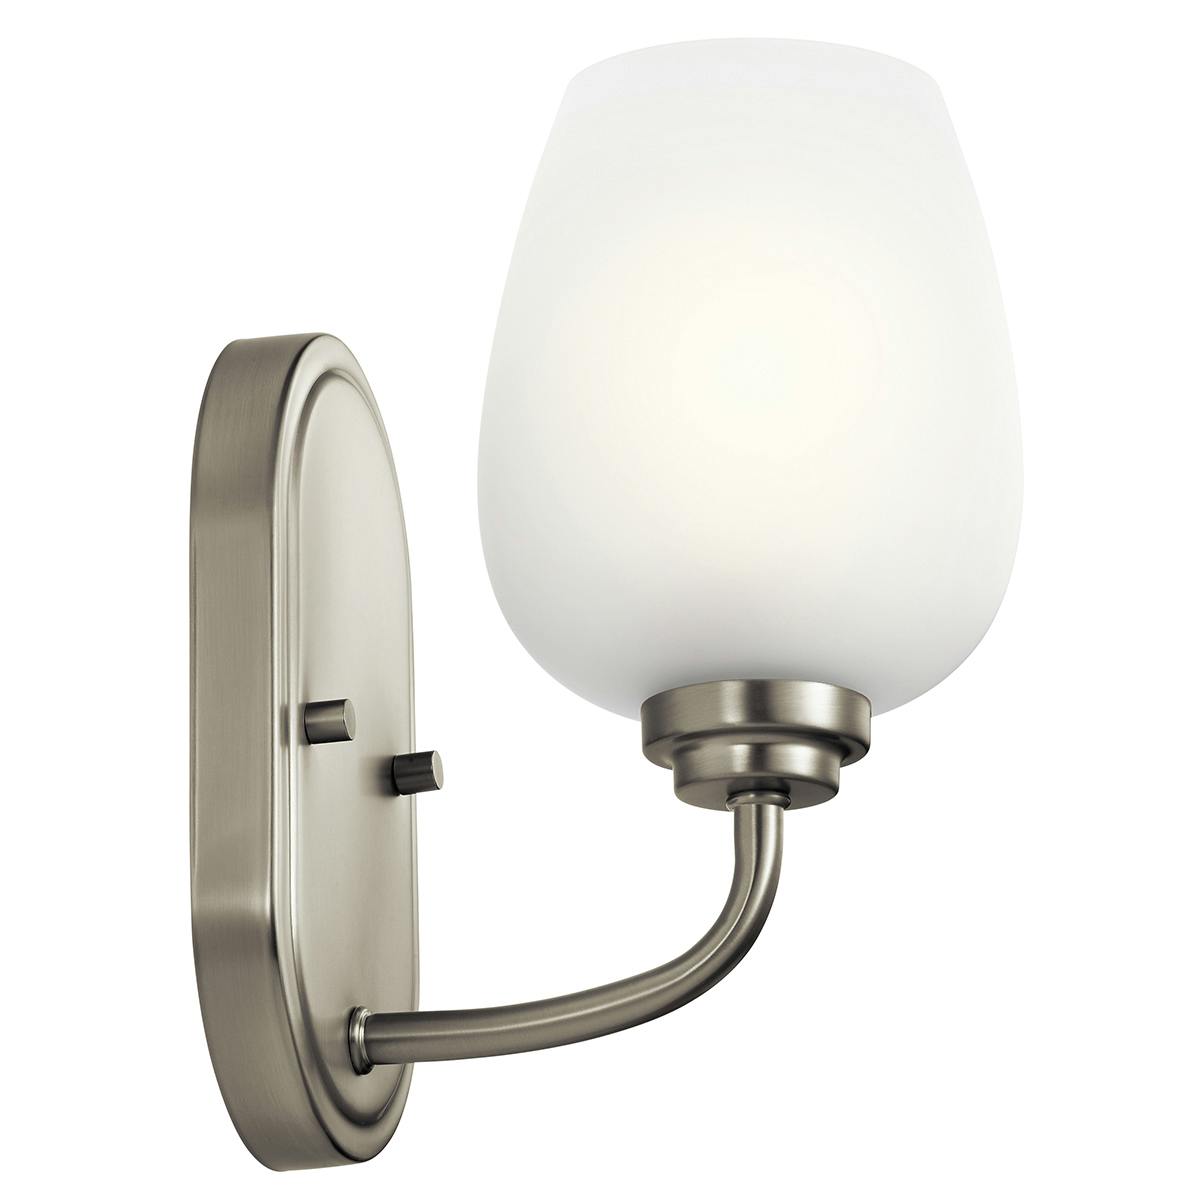 Profile view of the Valserrano 10" Sconce Glass Nickel on a white background